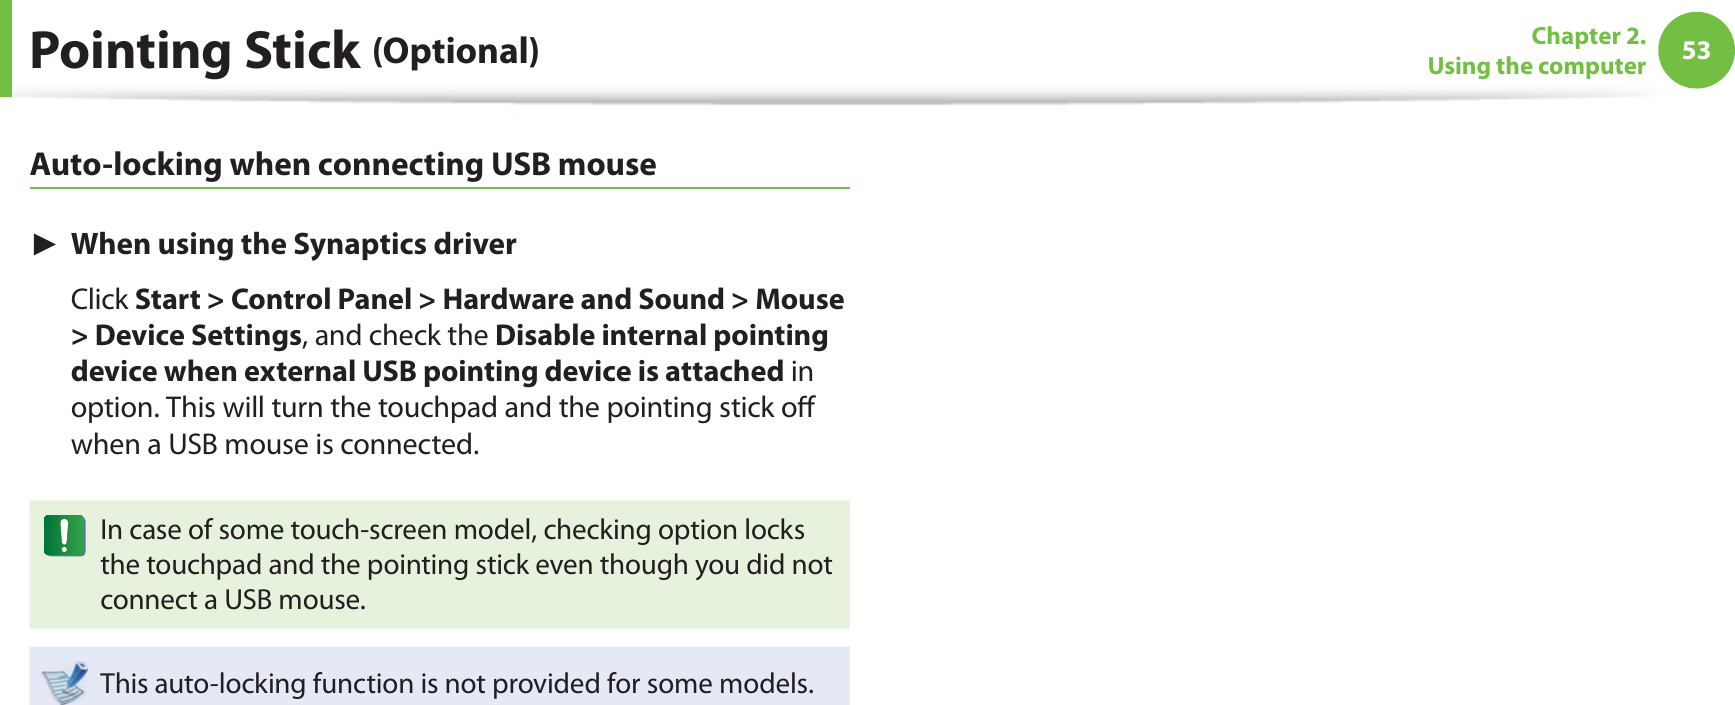 53Chapter 2. Using the computerPointing Stick (Optional)Auto-locking when connecting USB mouse► When using the Synaptics driver Click Start &gt; Control Panel &gt; Hardware and Sound &gt; Mouse &gt; Device Settings, and check the Disable internal pointing device when external USB pointing device is attached in option. This will turn the touchpad and the pointing stick oﬀ  when a USB mouse is connected. In case of some touch-screen model, checking option locks the touchpad and the pointing stick even though you did not connect a USB mouse. This auto-locking function is not provided for some models.